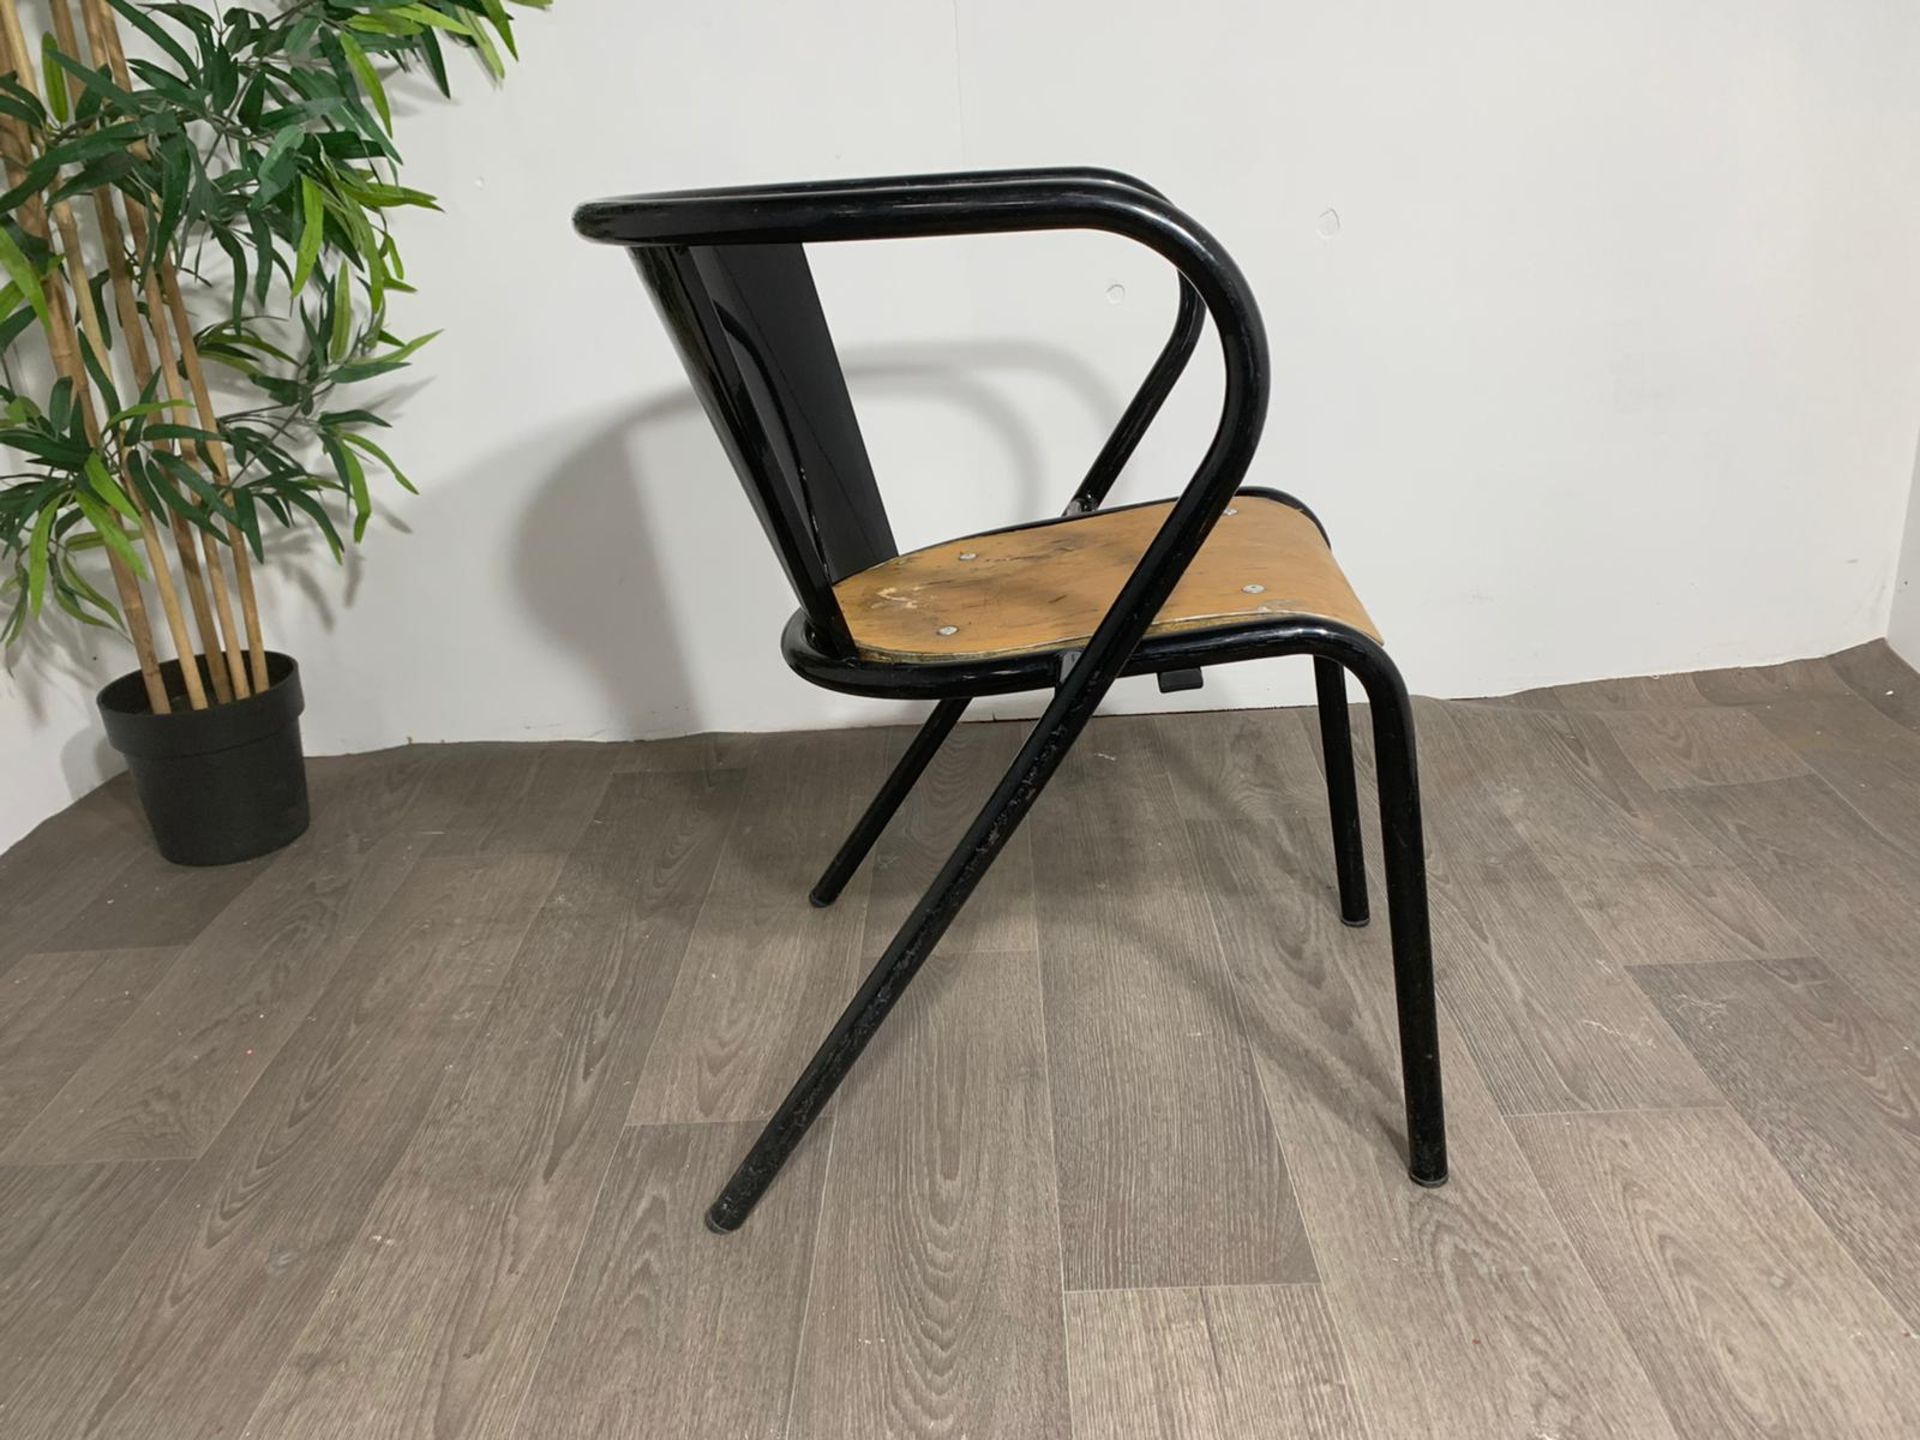 Adico 5008 Black Chair With Wooden Seat - Image 3 of 10